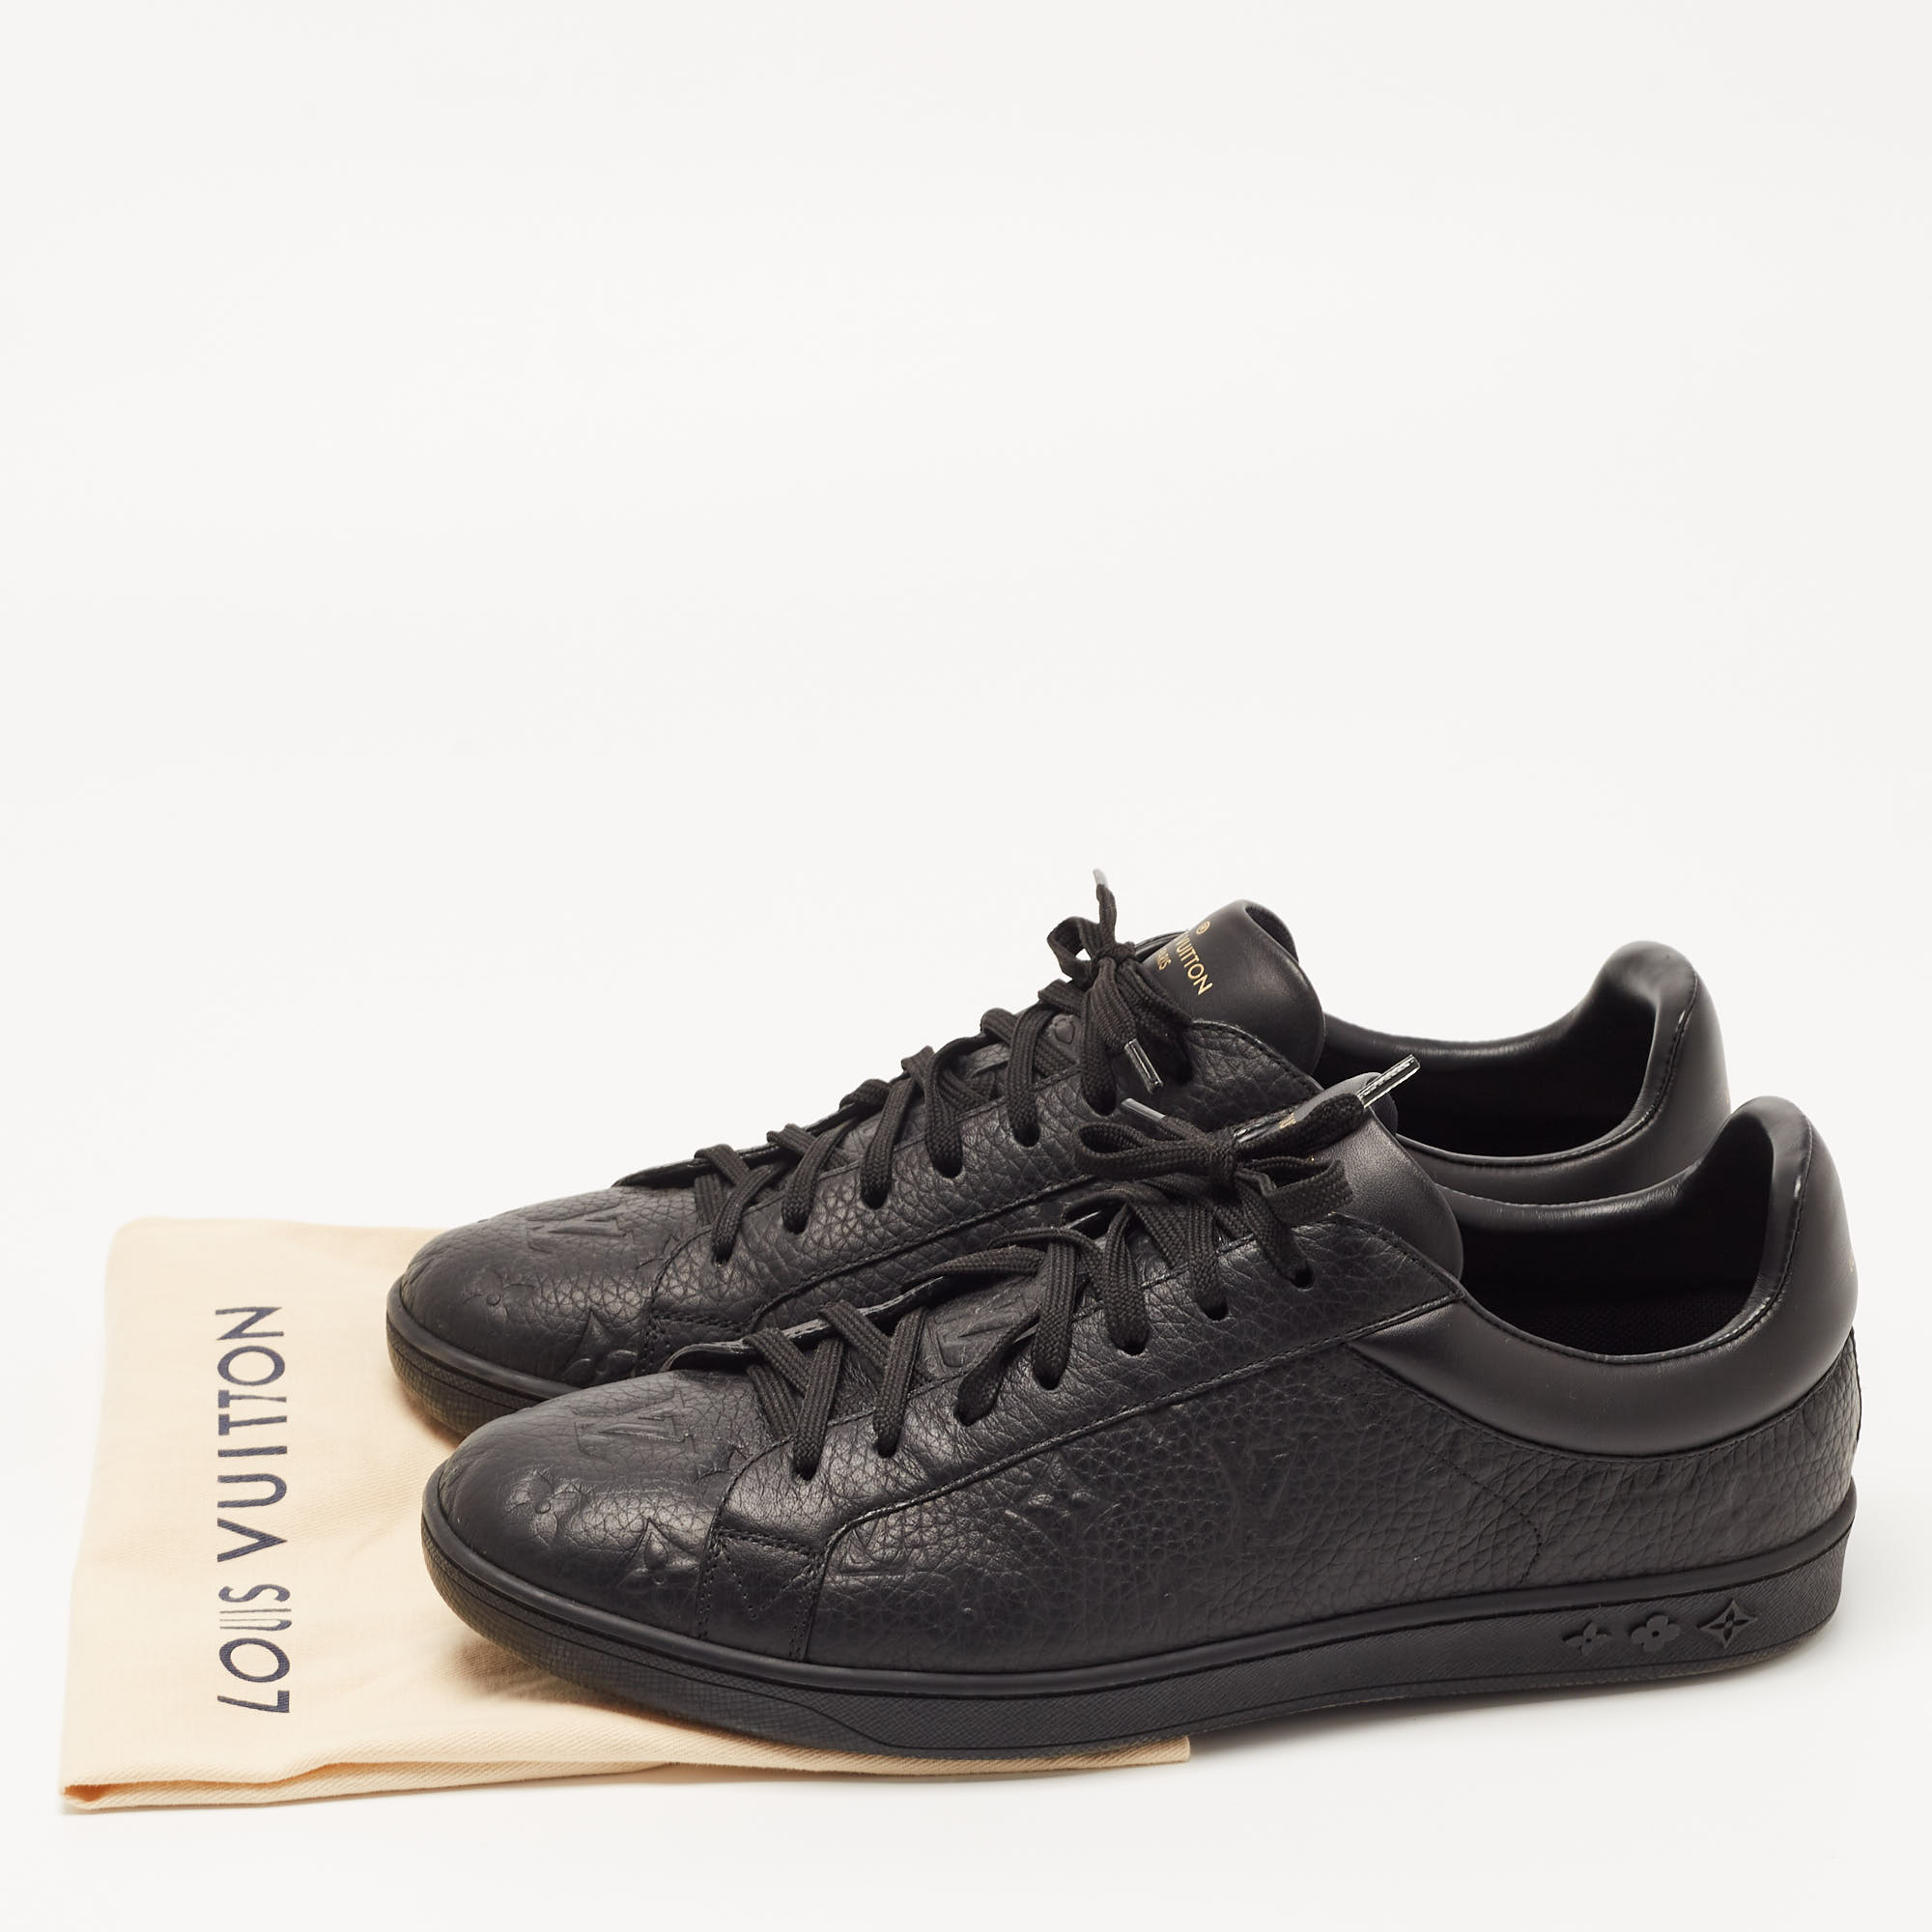 Louis Vuitton Black Monogram Leather Luxembourg Sneakers Size 43